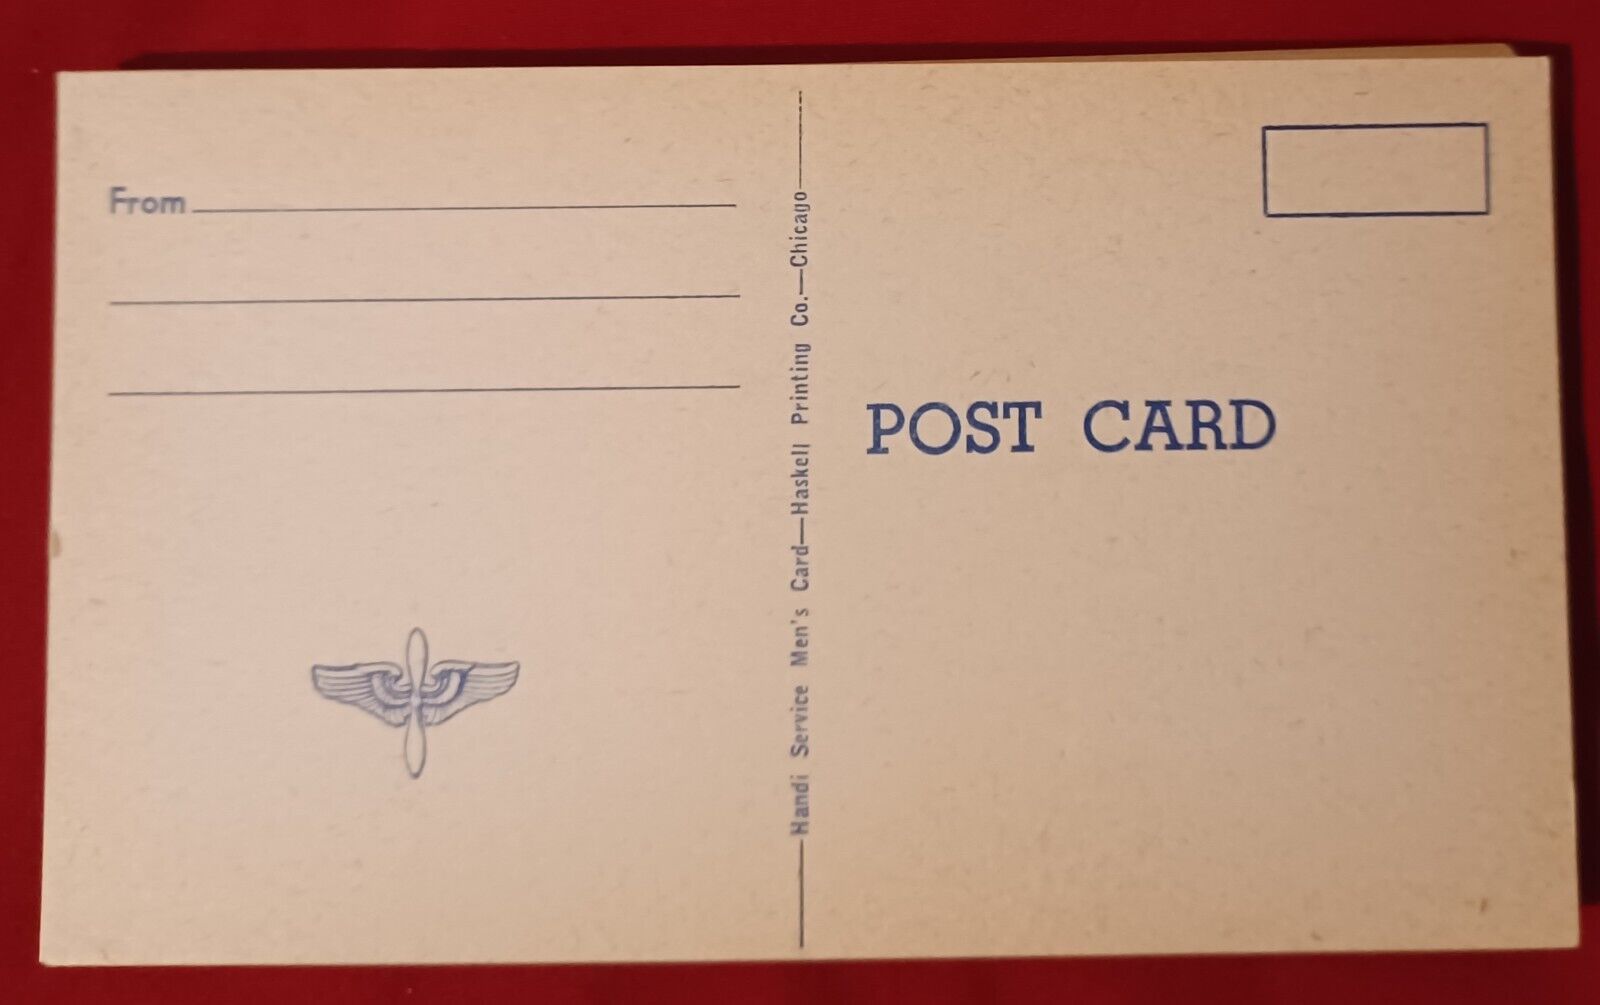 Lot of 10 RARE Handi Service Men's Card Postcards Blank Unposted US AIR FORCE